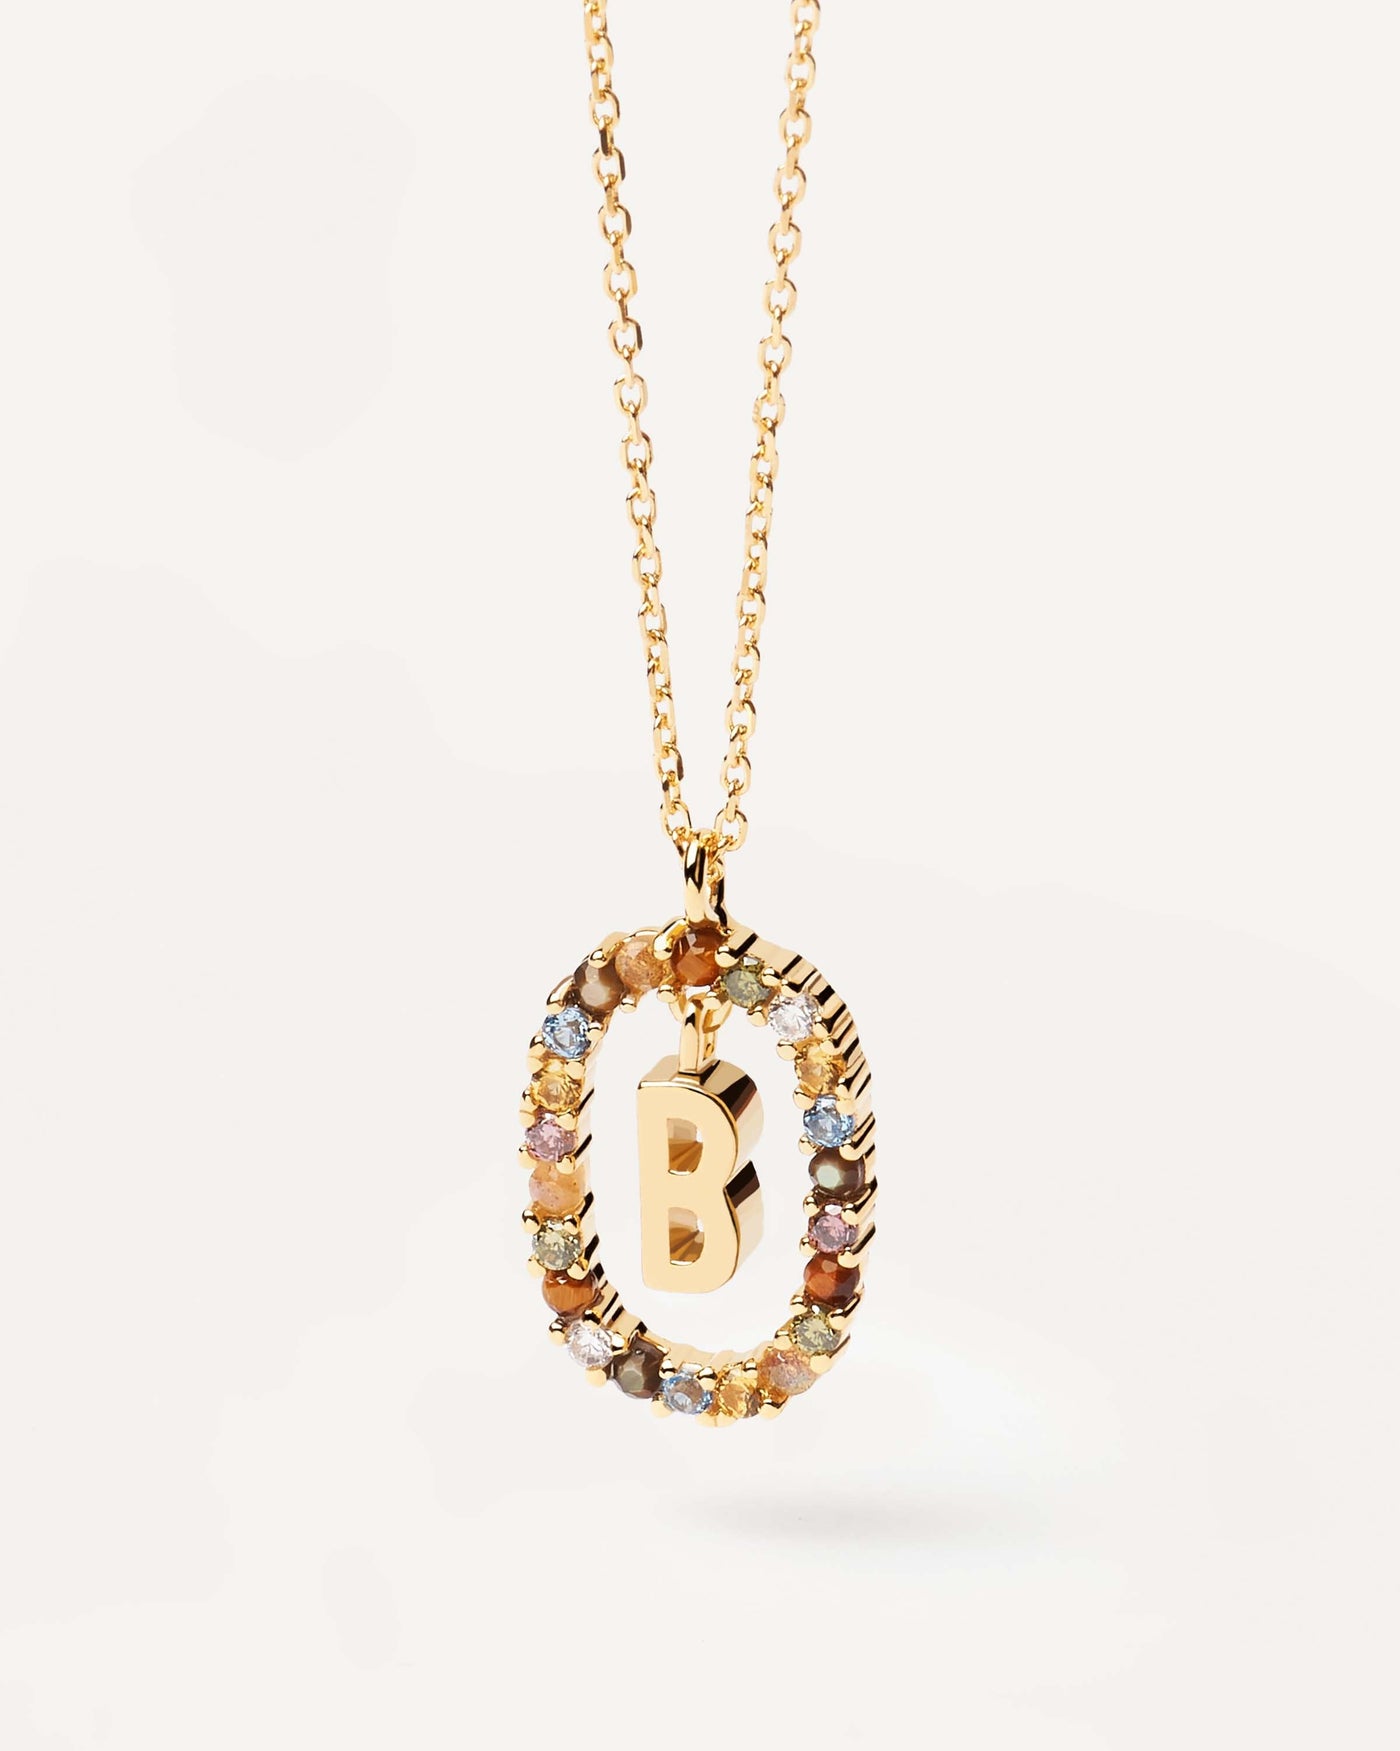 2023 Selection | Letter B necklace. Initial B necklace in gold-plated silver, circled by colorful gemstones. Get the latest arrival from PDPAOLA. Place your order safely and get this Best Seller. Free Shipping.